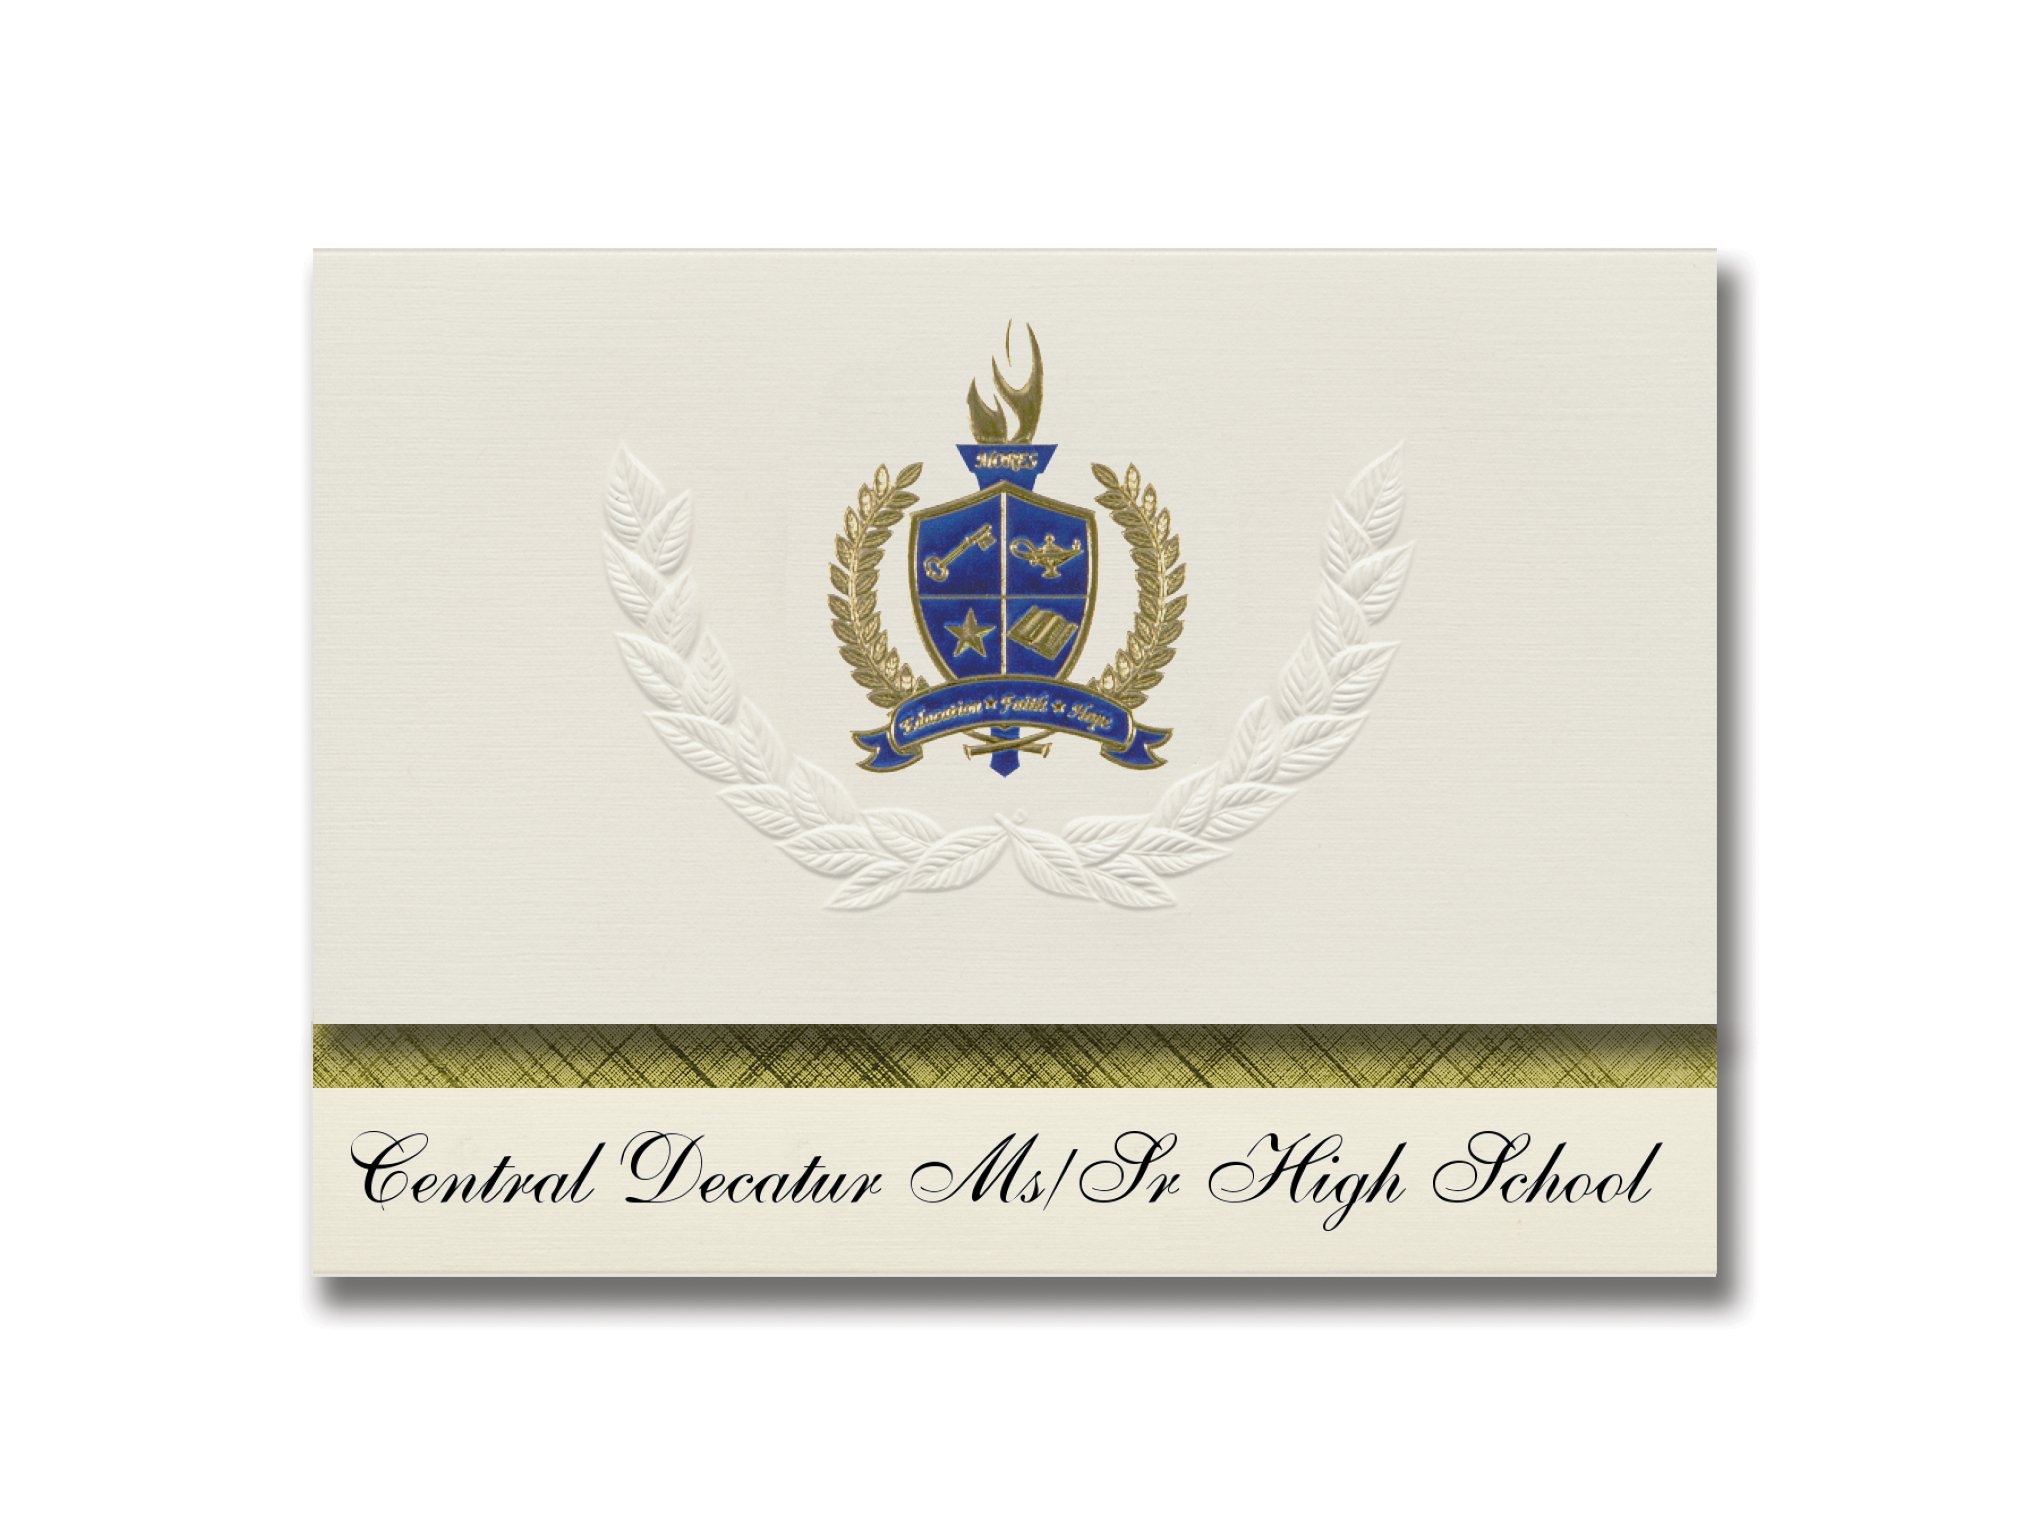 Signature Announcements Central Decatur Ms/Sr High School (Leon, IA) Graduation Announcements, Presidential style, Elite package of 25 with Gold & ...